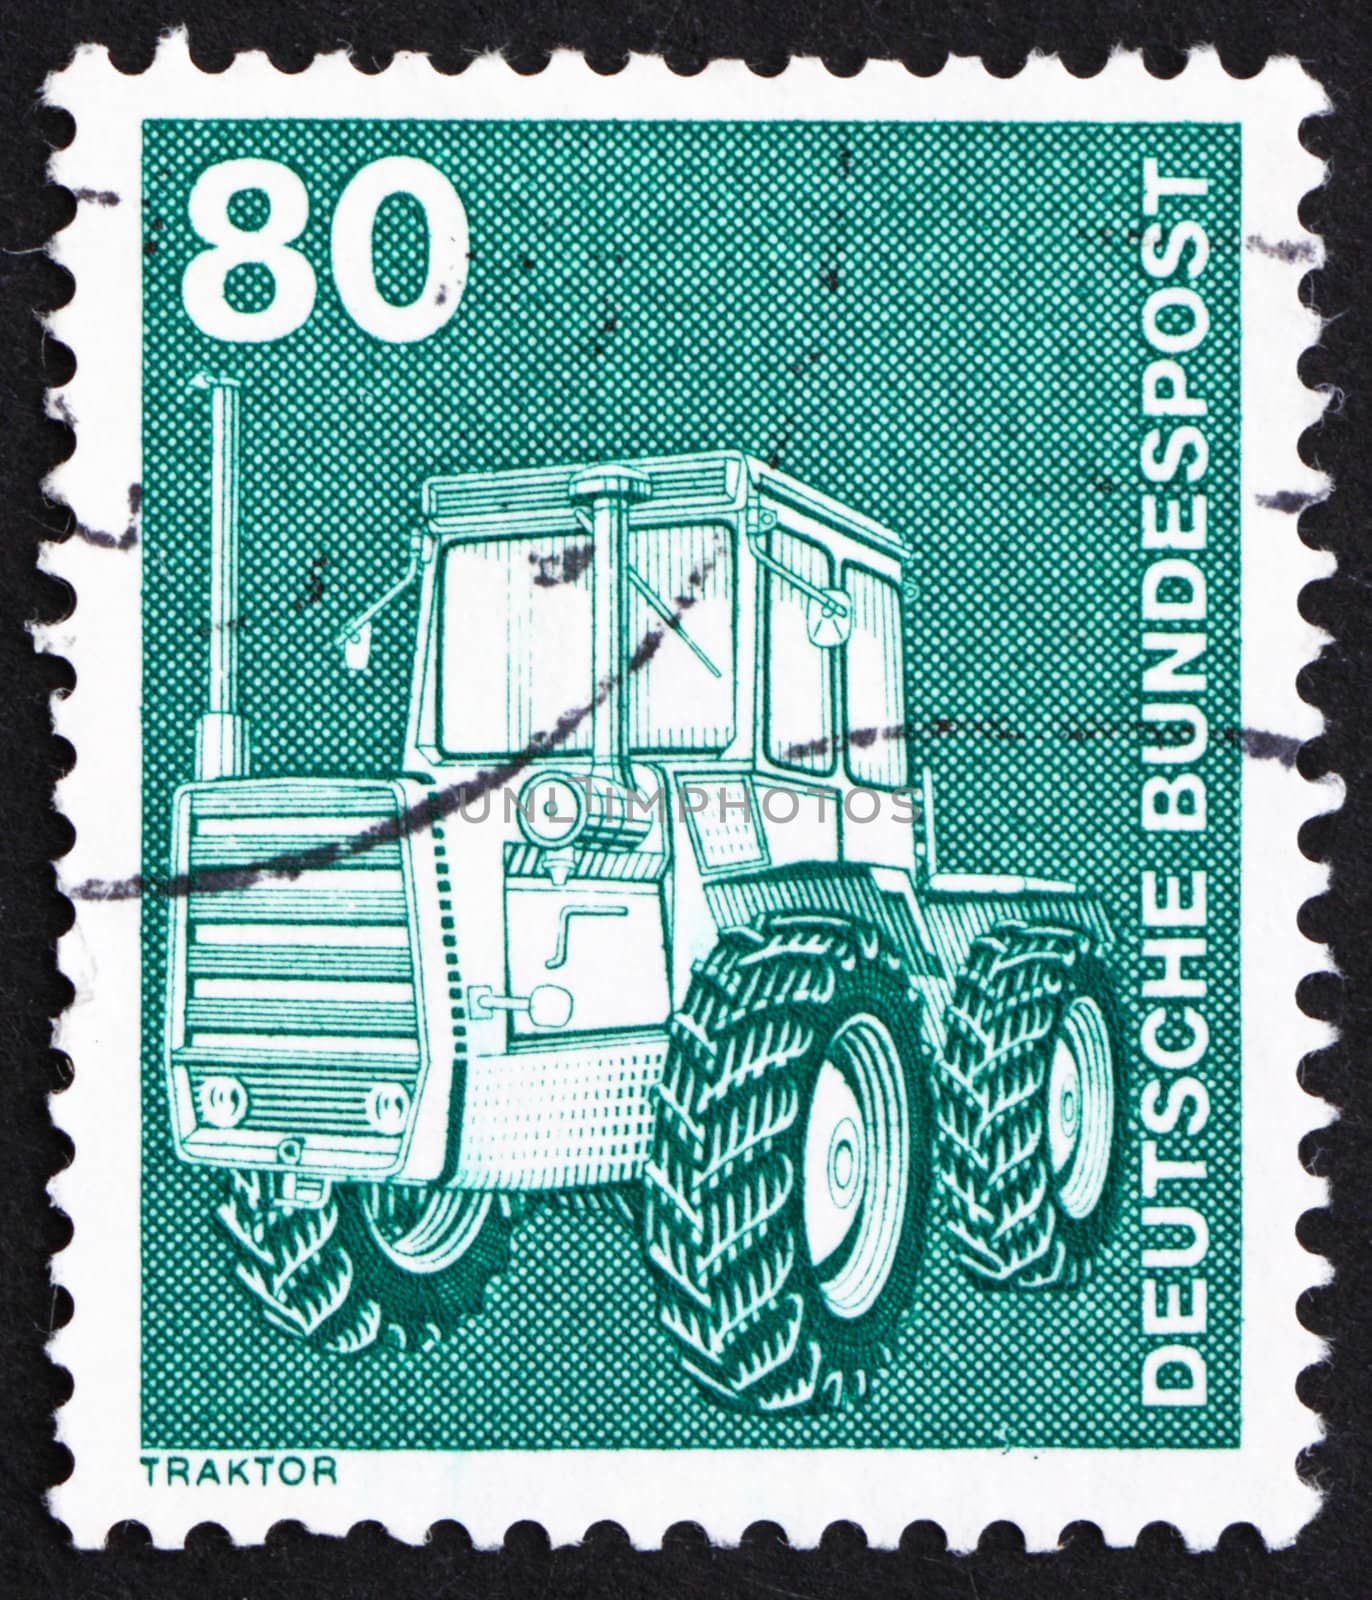 GERMANY - CIRCA 1975: a stamp printed in the Germany shows Tractor, circa 1975